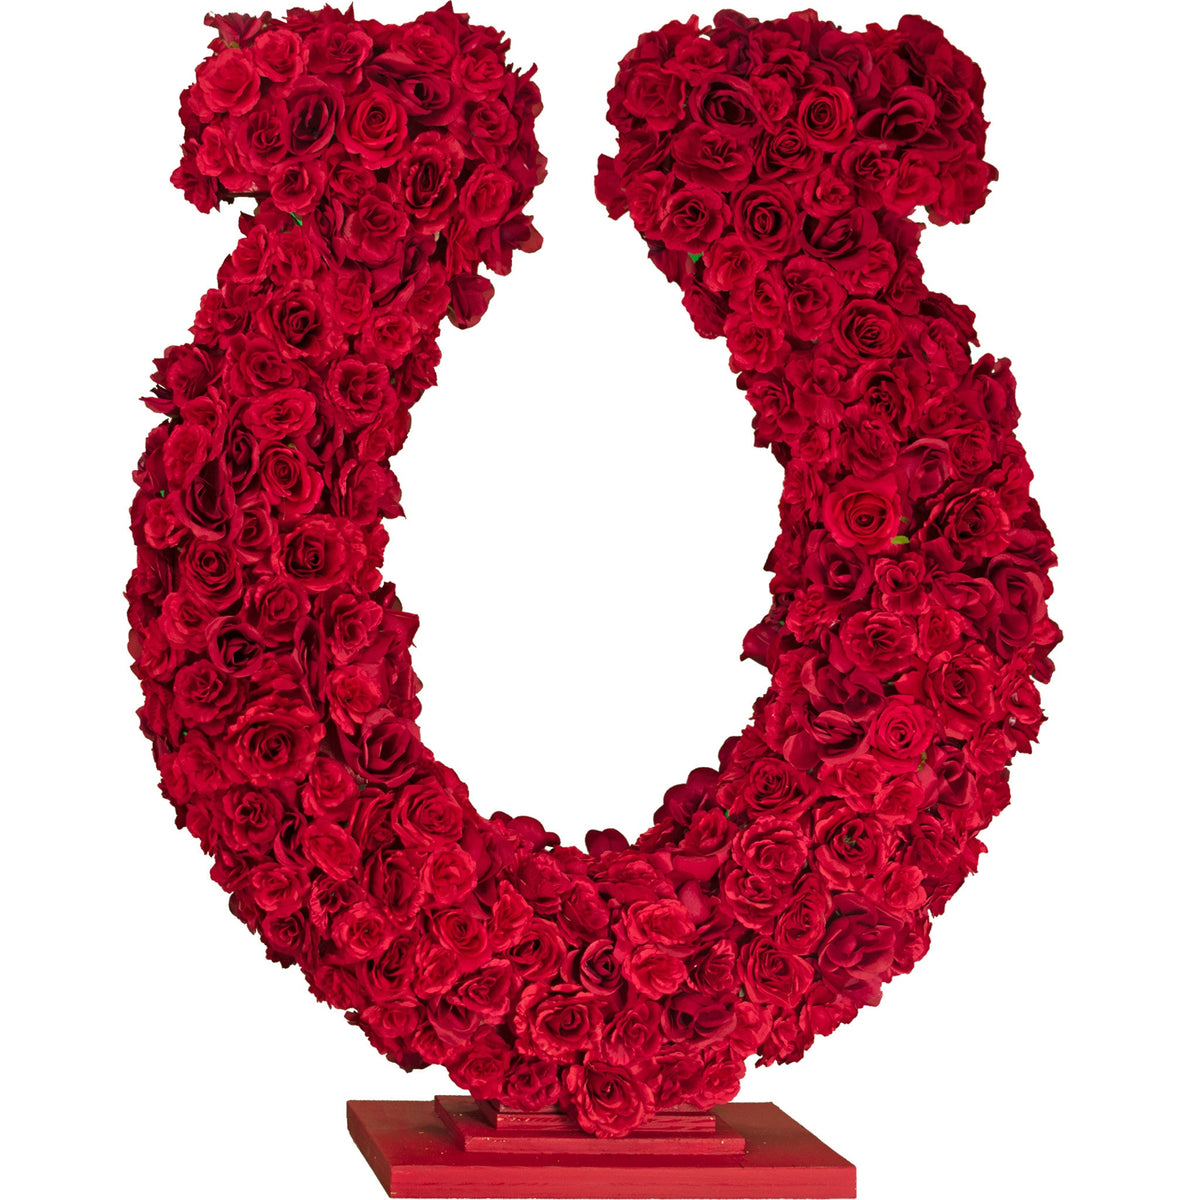 40in tall Rose Petal Horseshoe Centerpiece and Tabletop Display made with artificial rosebud flowers on a foam core and a wooden base painted in red.